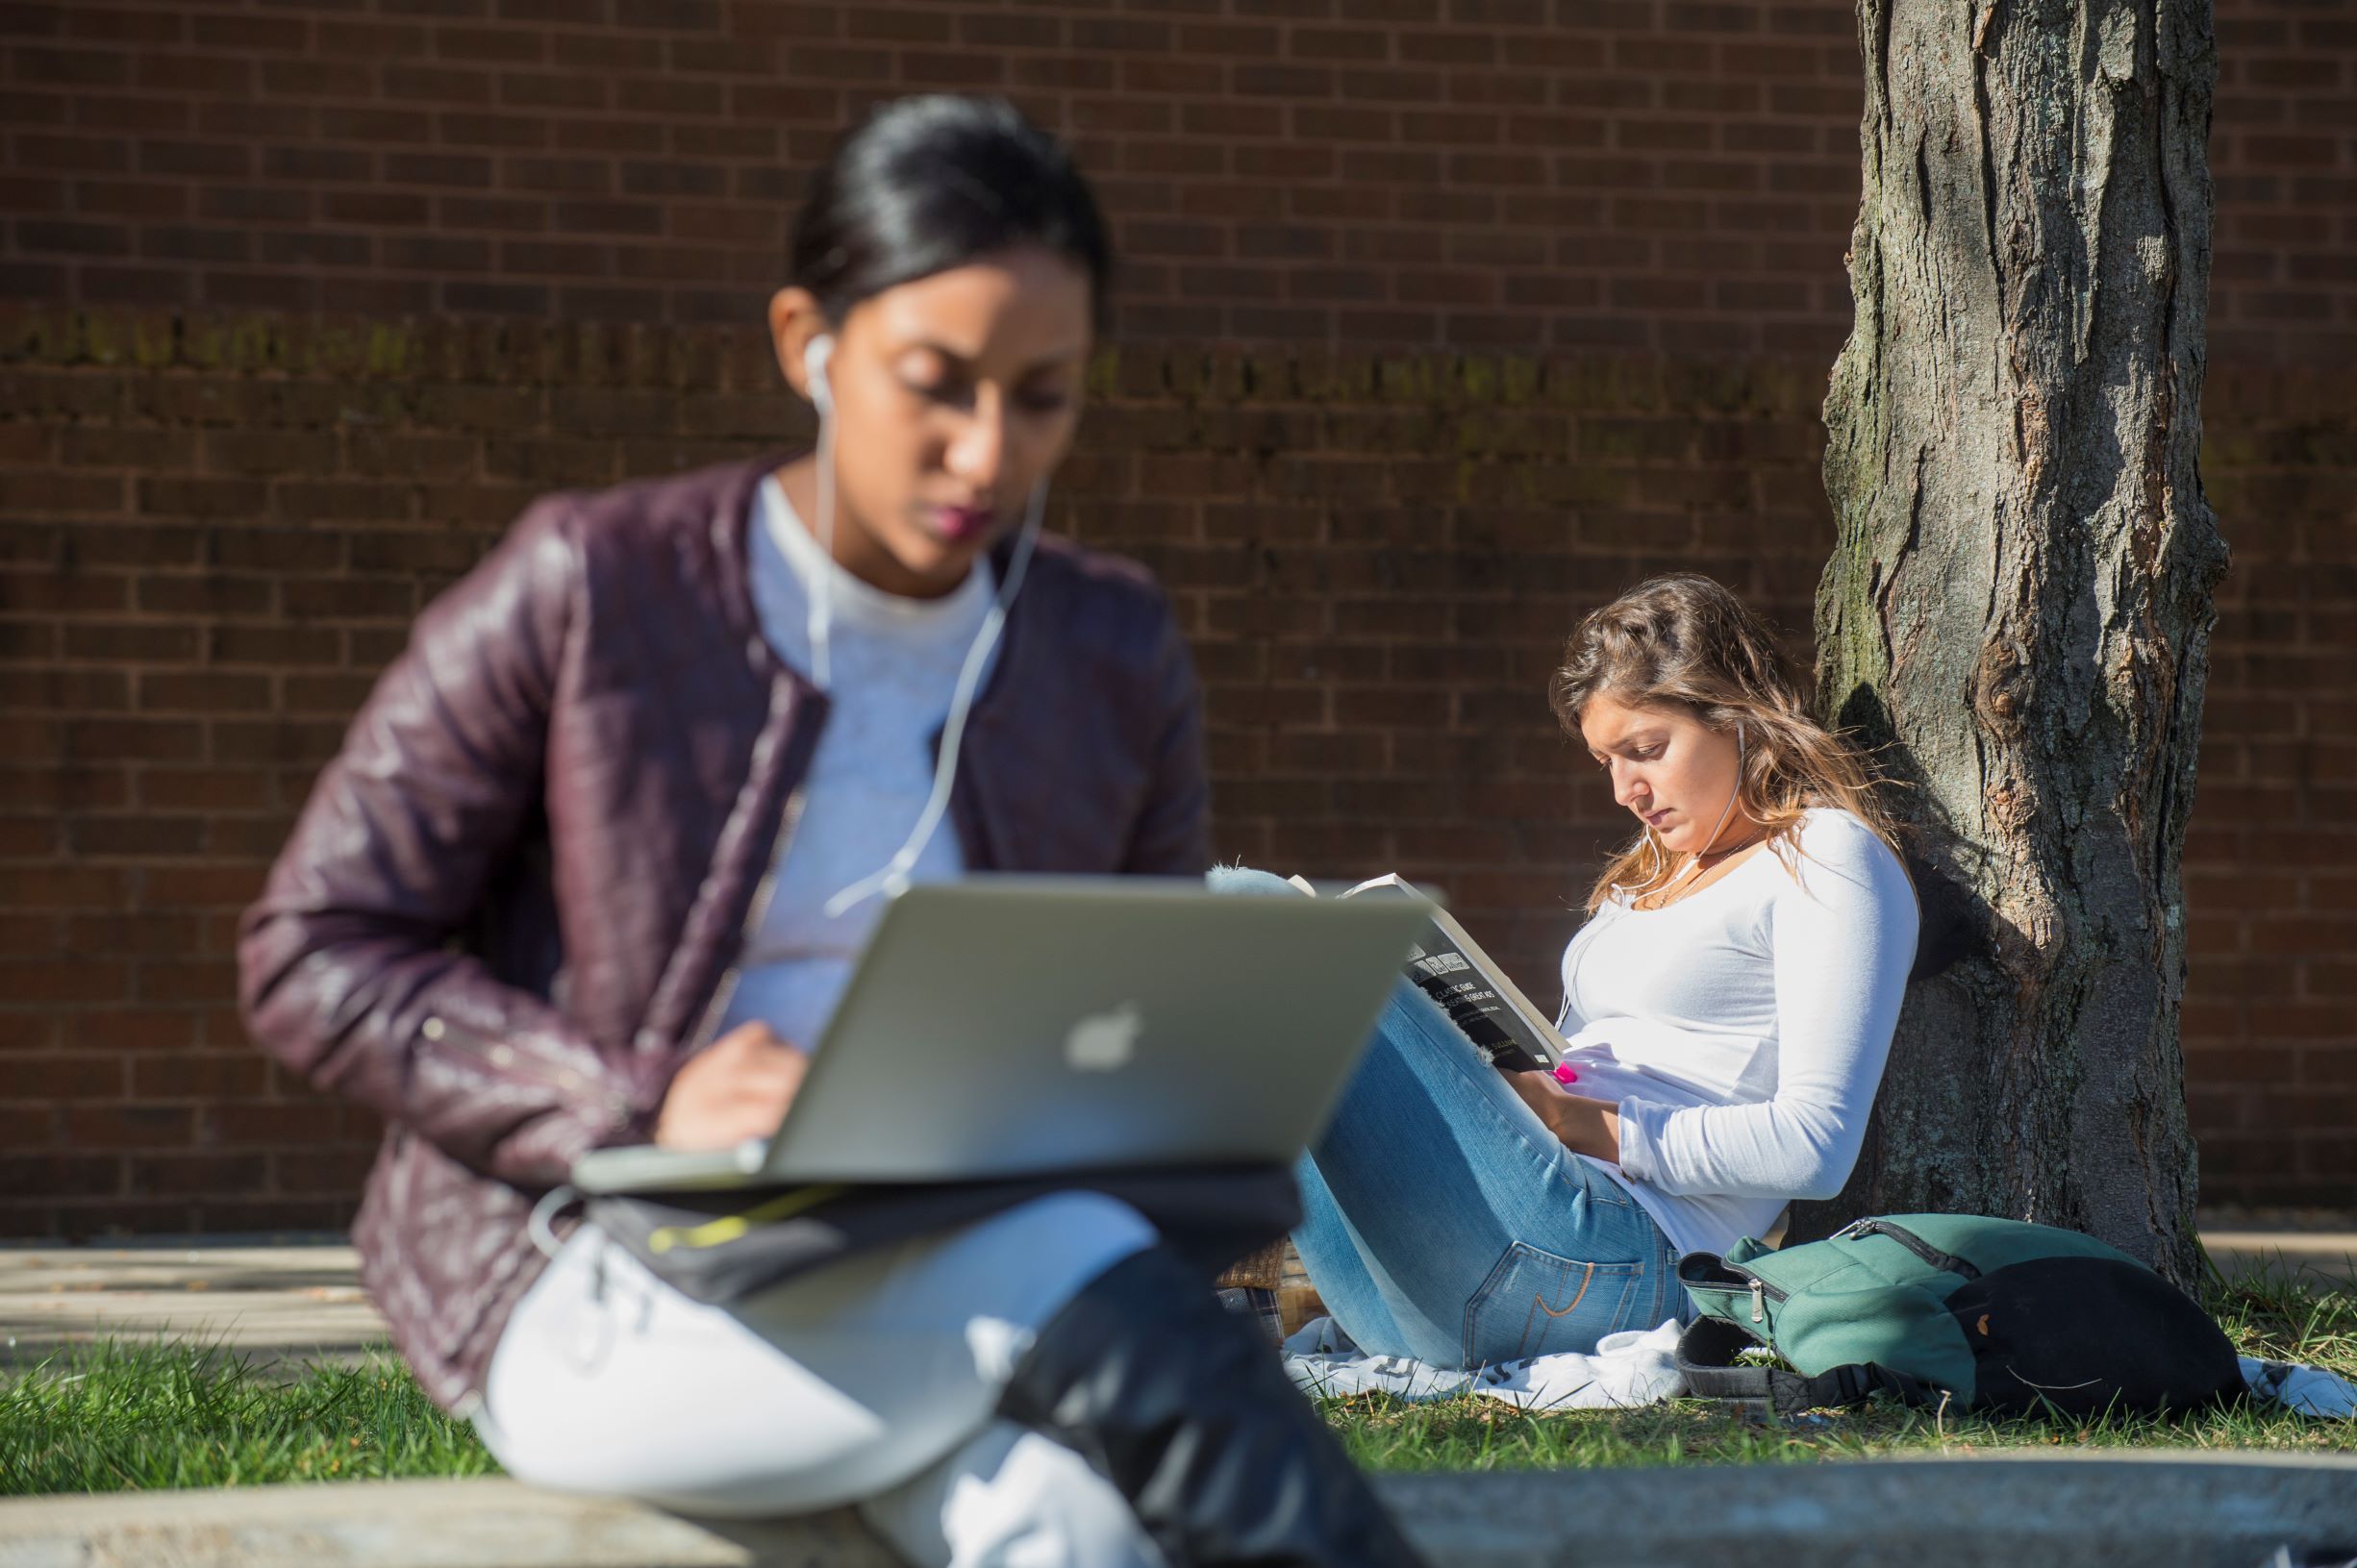 Female student working at computer and female student reading a book under a tree